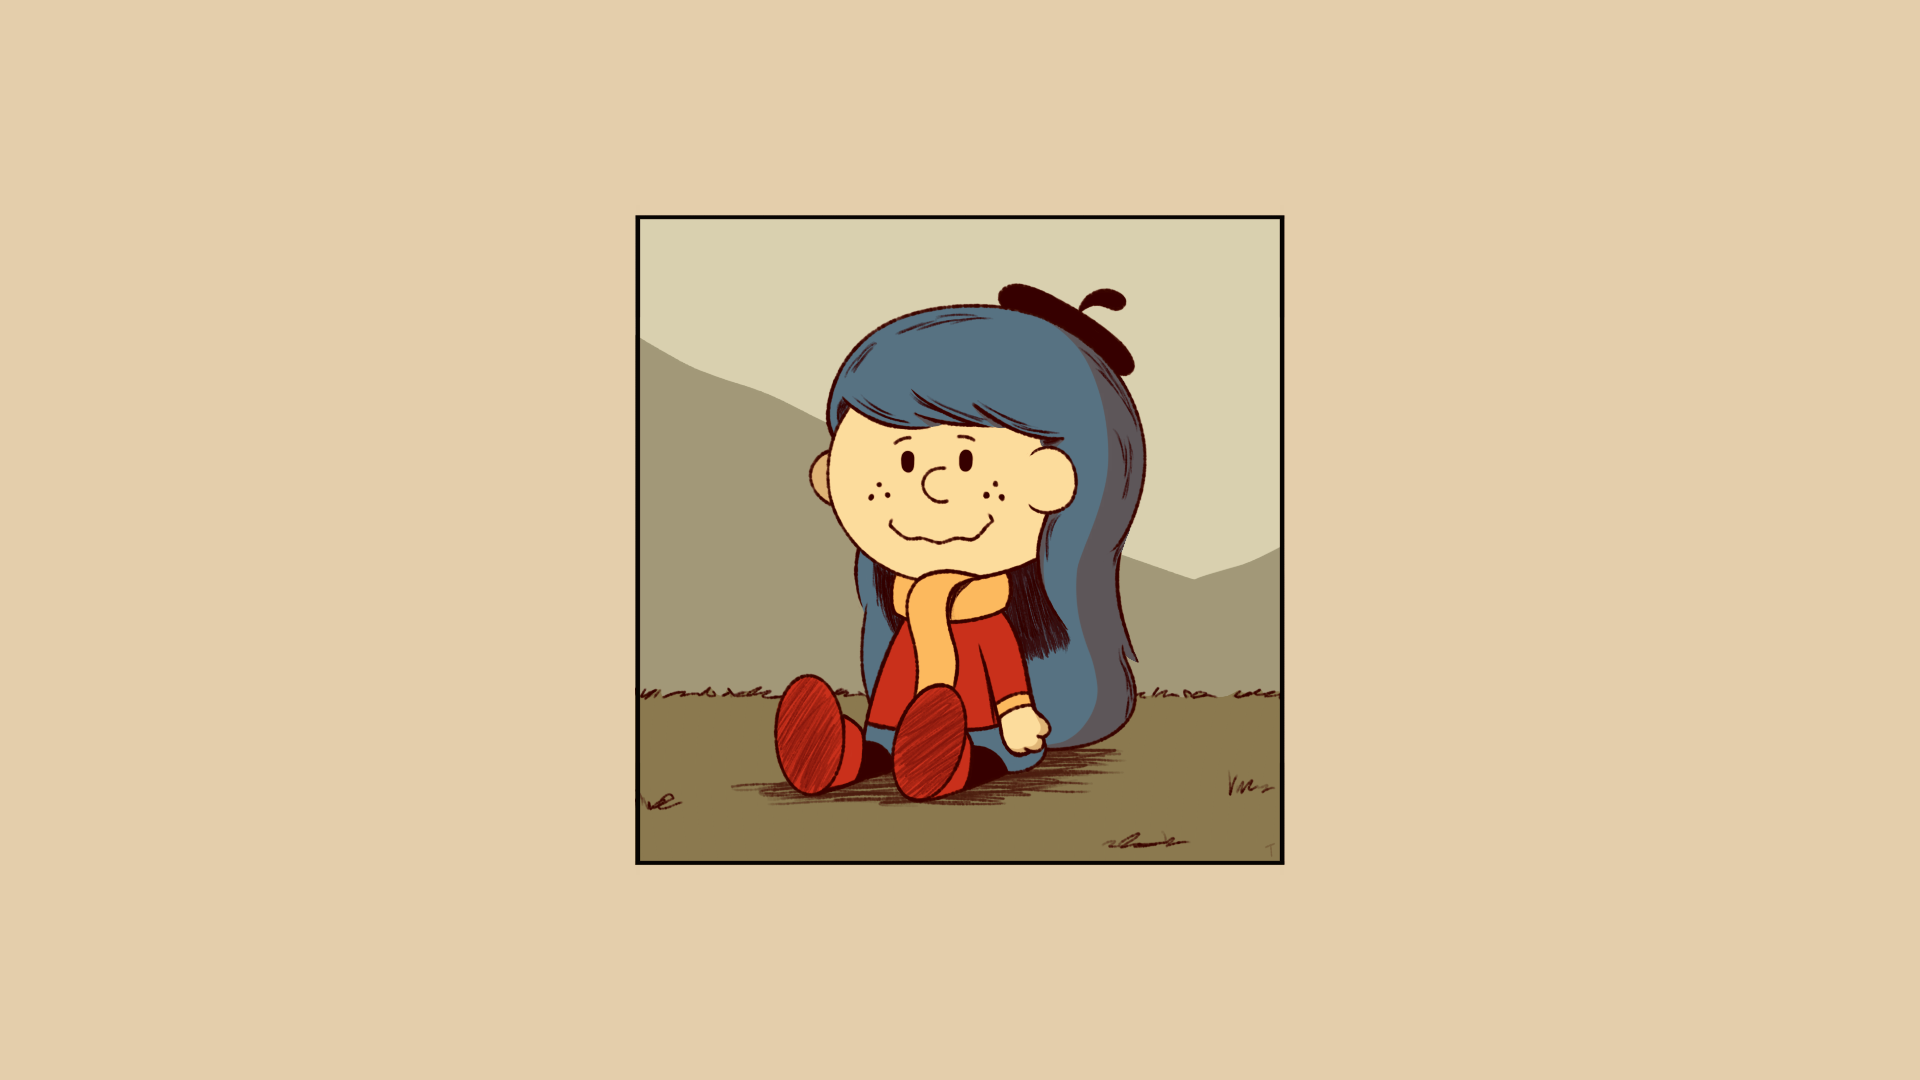 Anime 1920x1080 cartoon cartoon girls Hilda blue hair berets scarf shoes red shoes smiling sitting grass simple background comics doll Peanuts (comic) Charlie Brown crossover